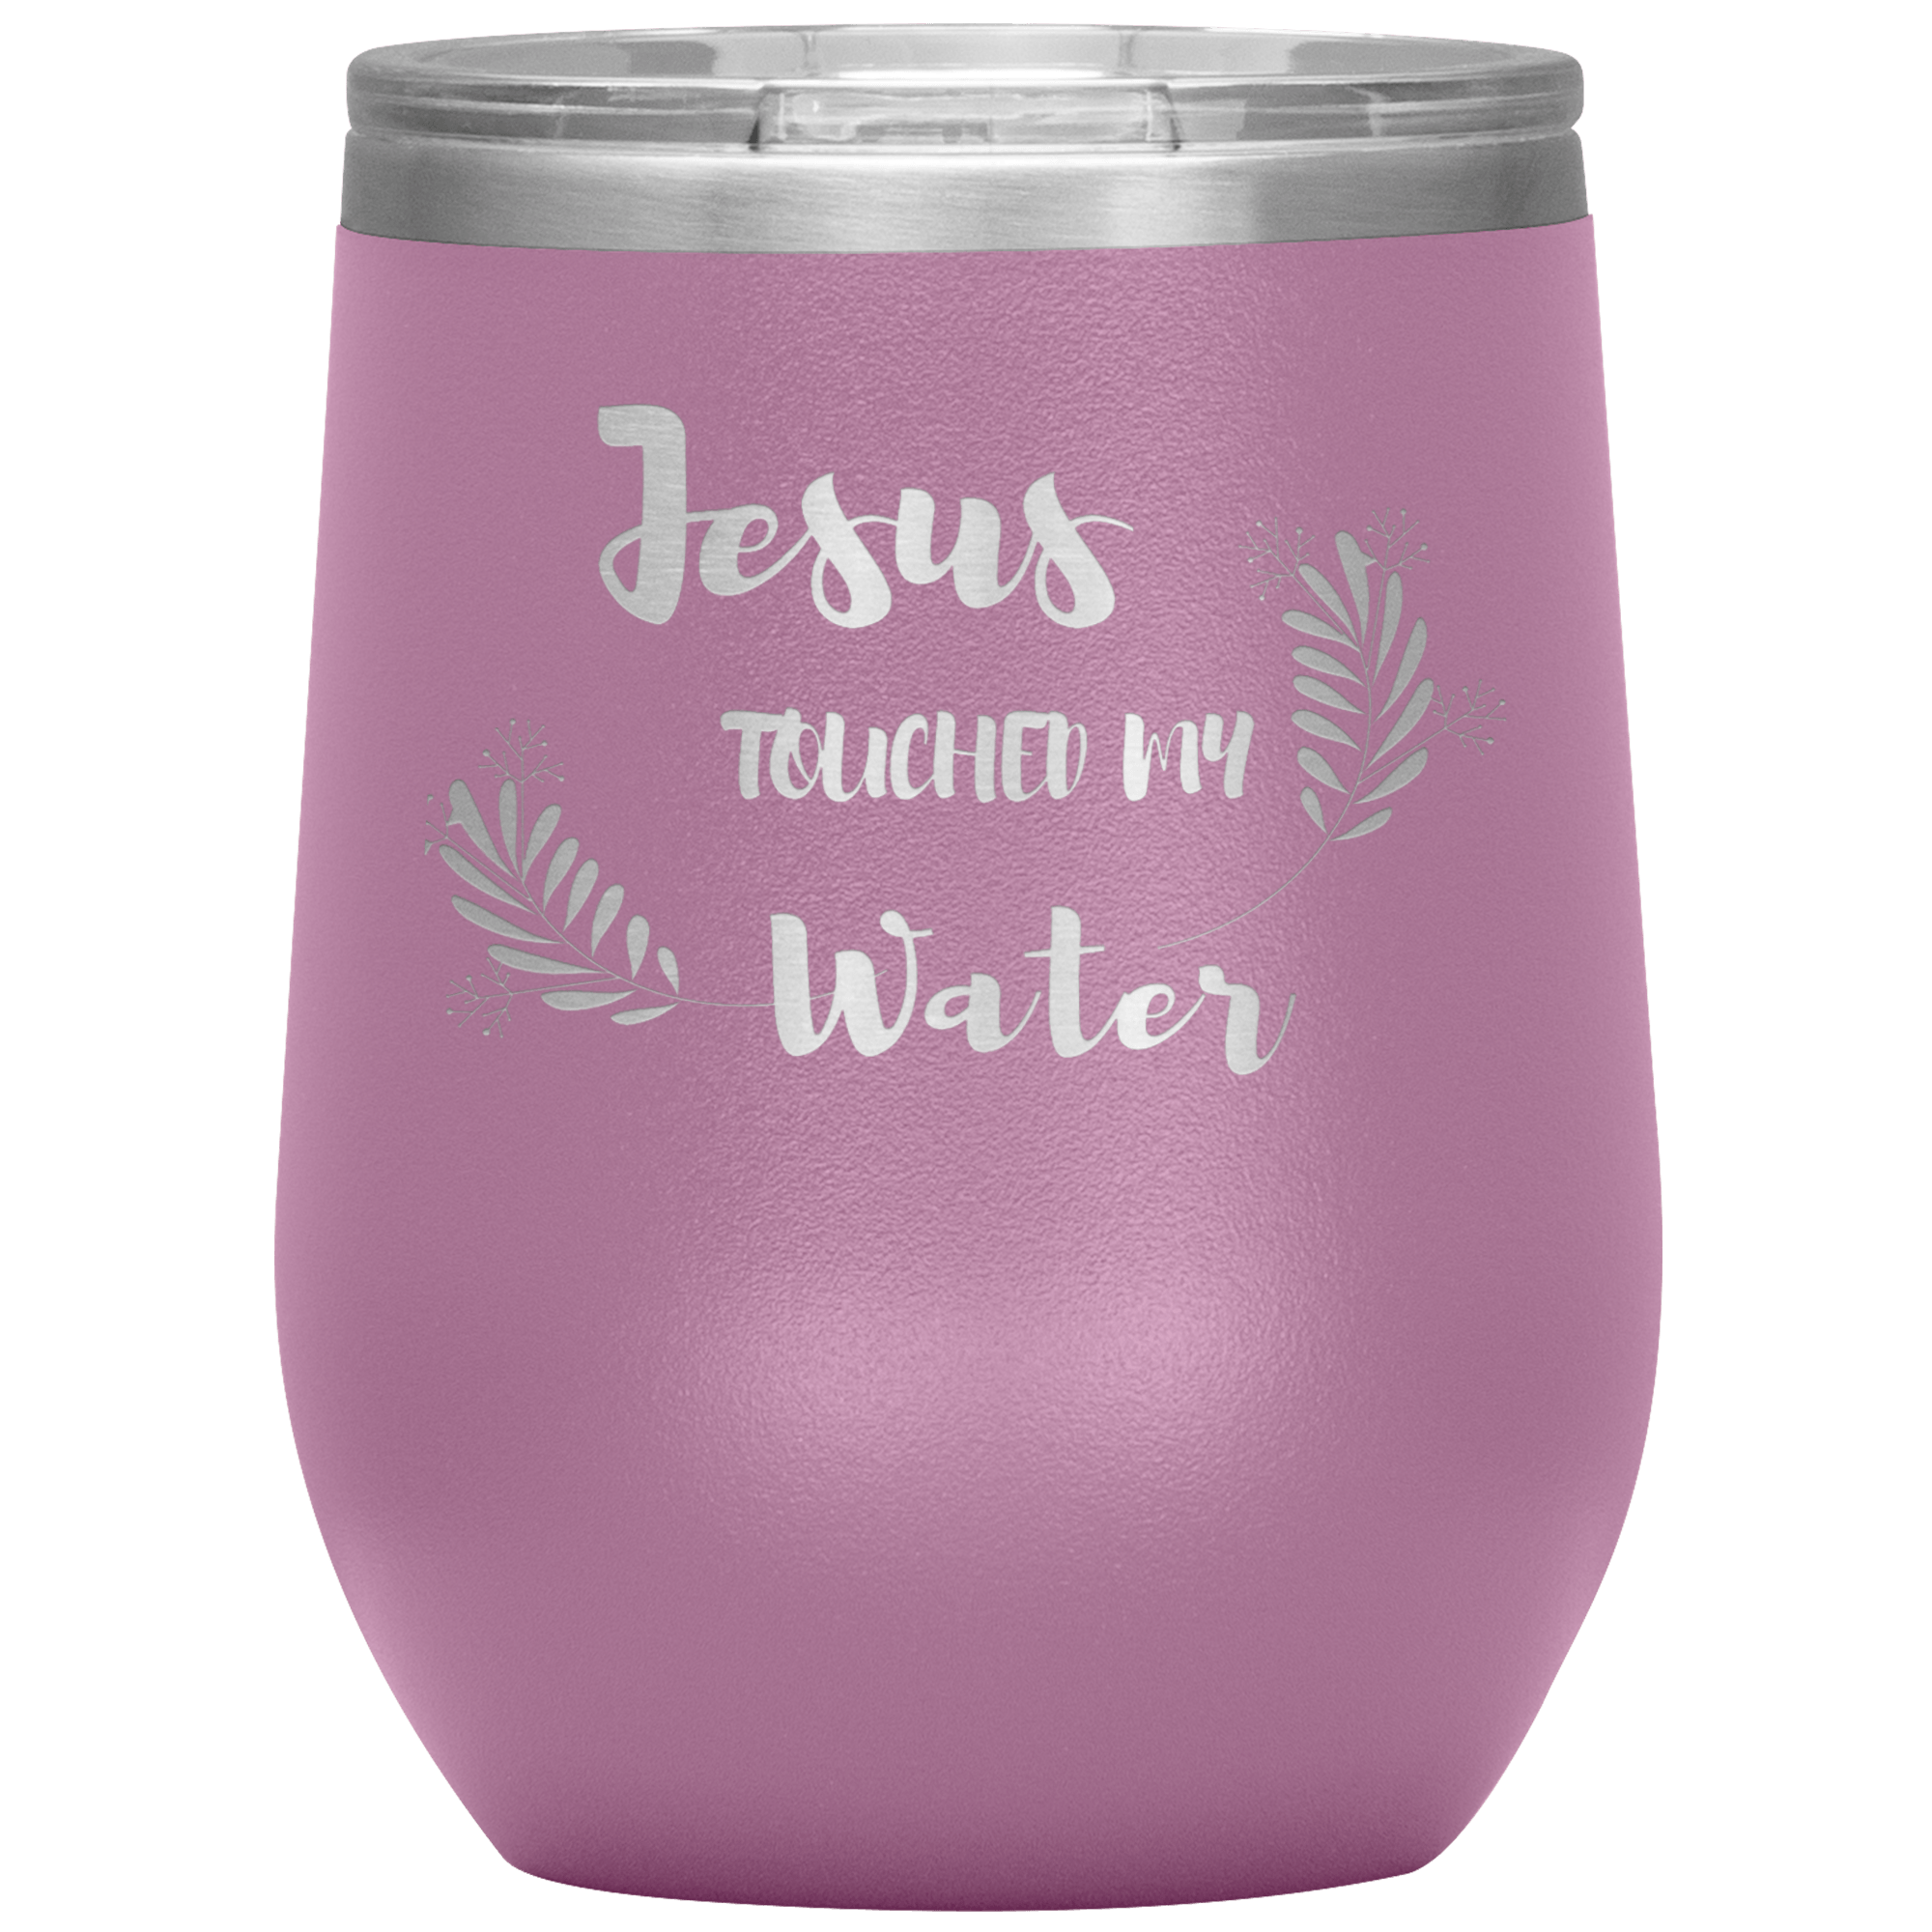 "JESUS TOUCHED MY WATER"Tumbler